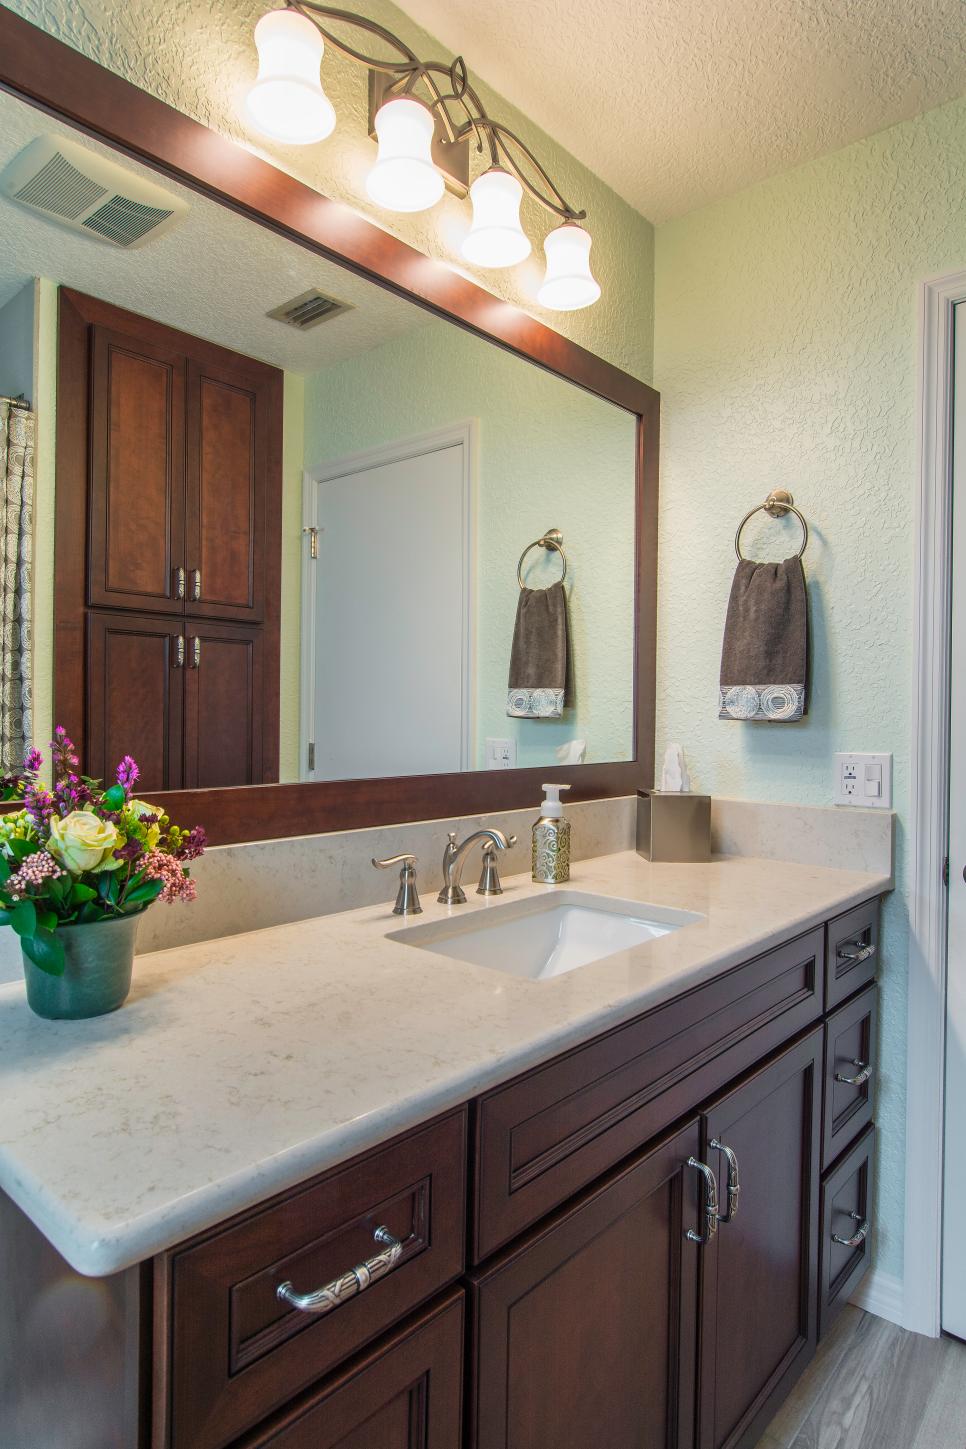 Green Transitional Style Bathroom With Wood Vanity And Cabinetry | HGTV